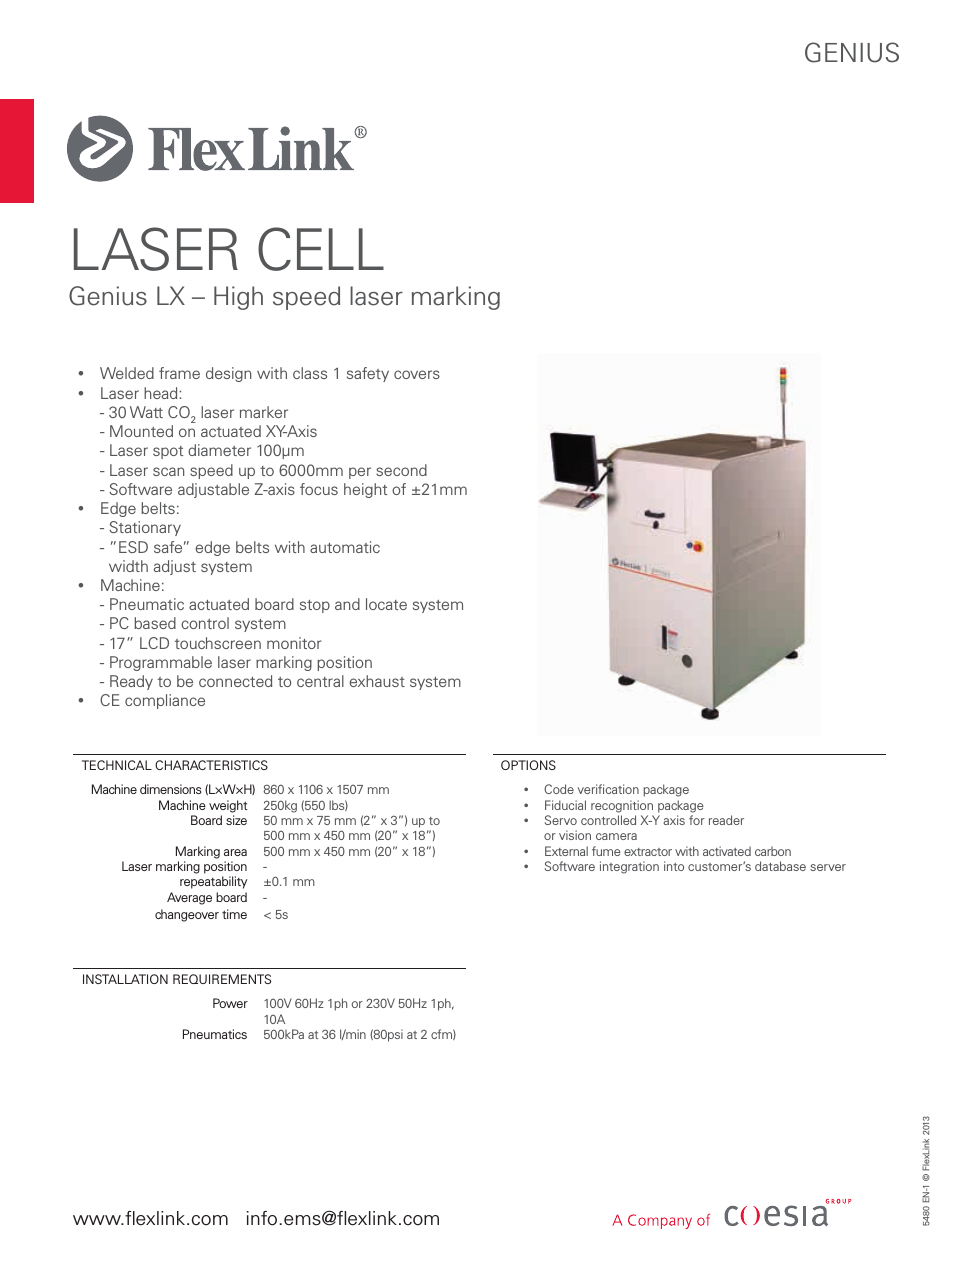 Laser Cell